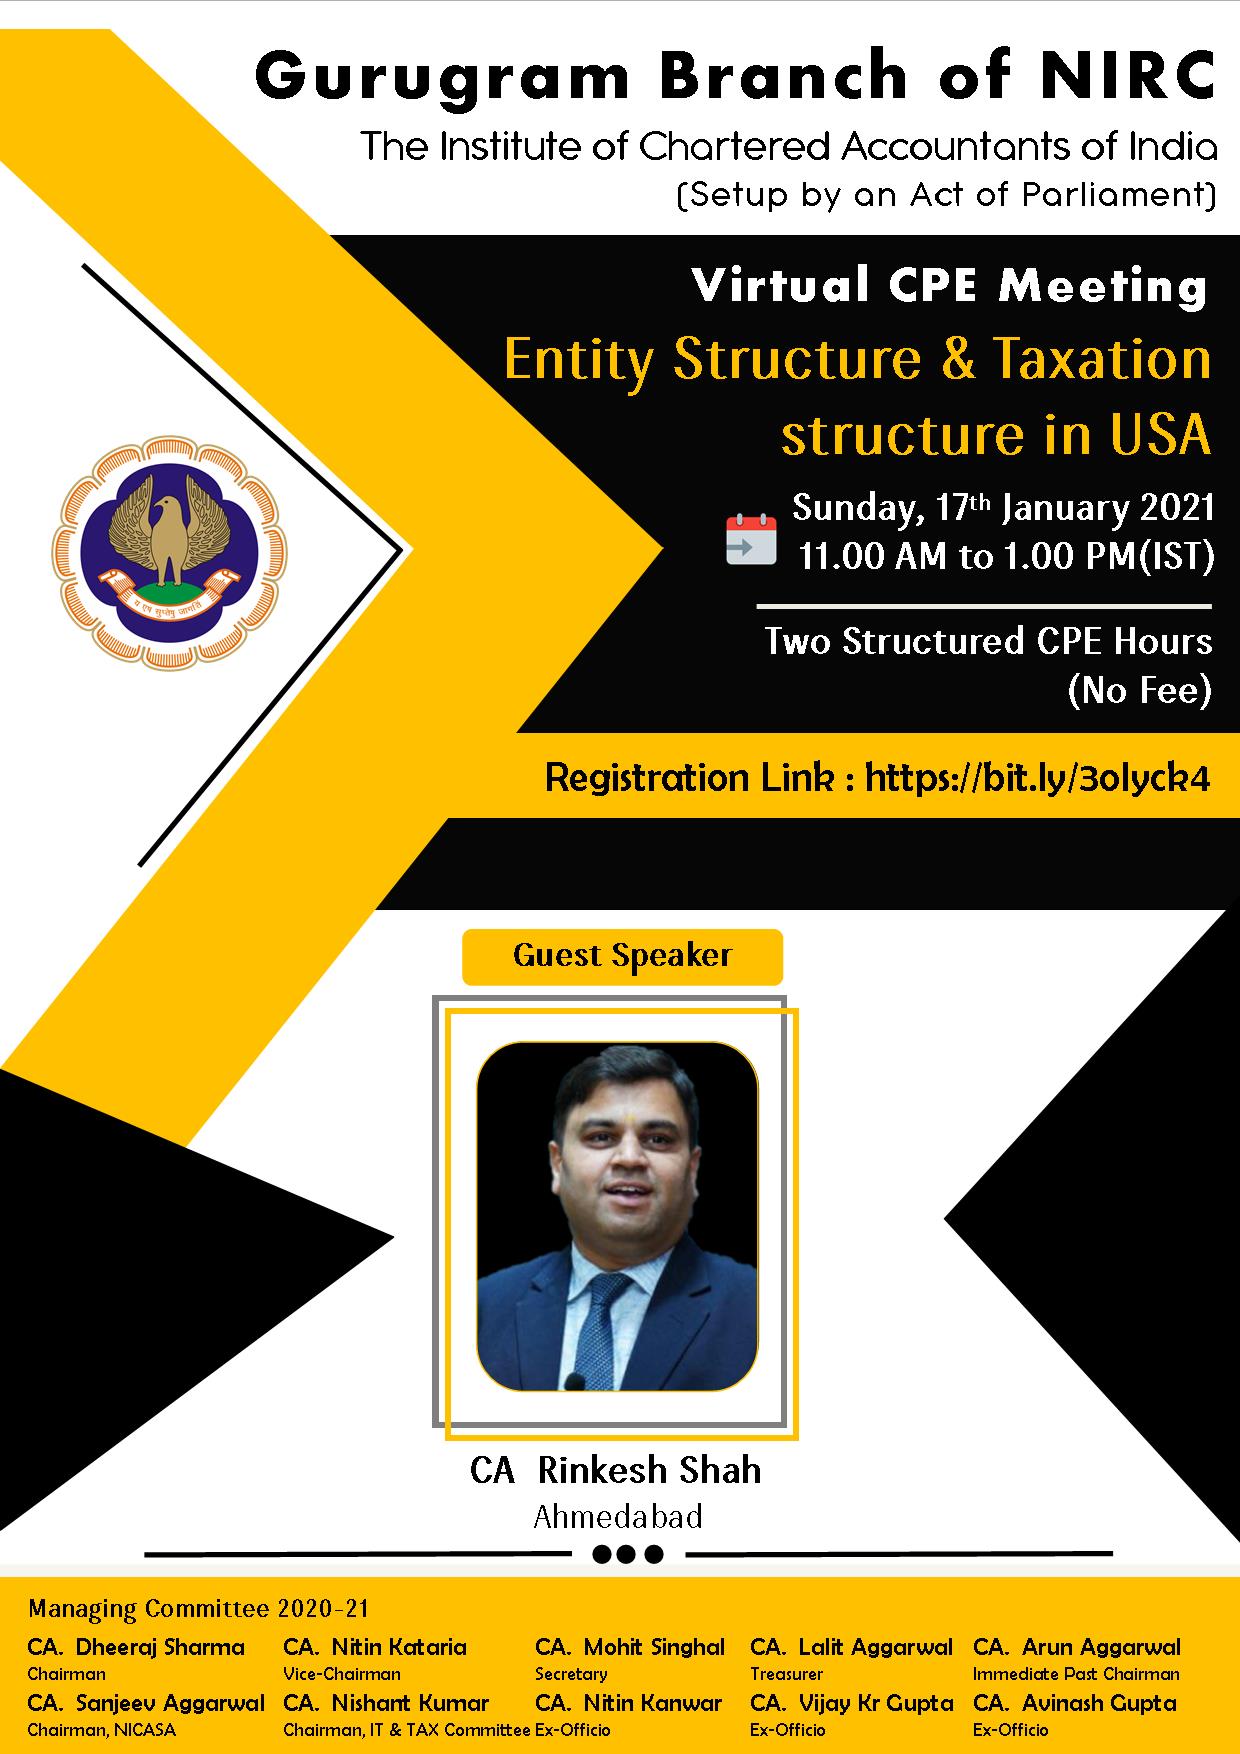 Virtual CPE Meeting on Entity Structure and Taxation structure in USA